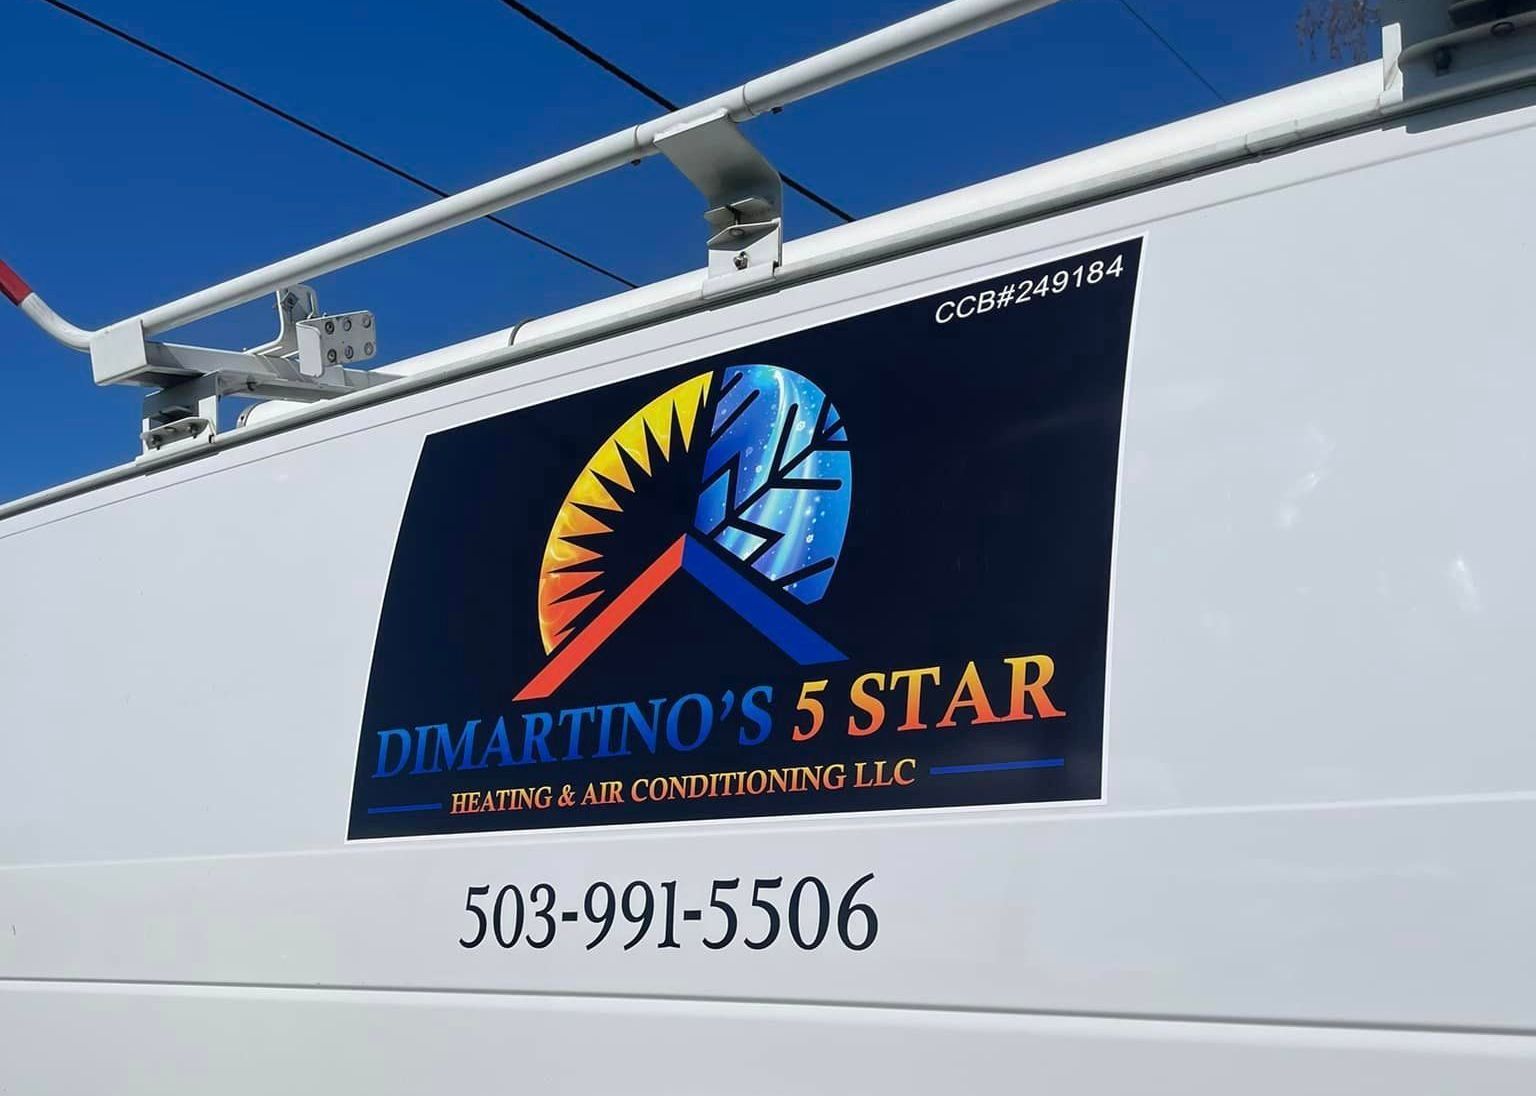 A white van with a sign that says dimartino 's 5 star